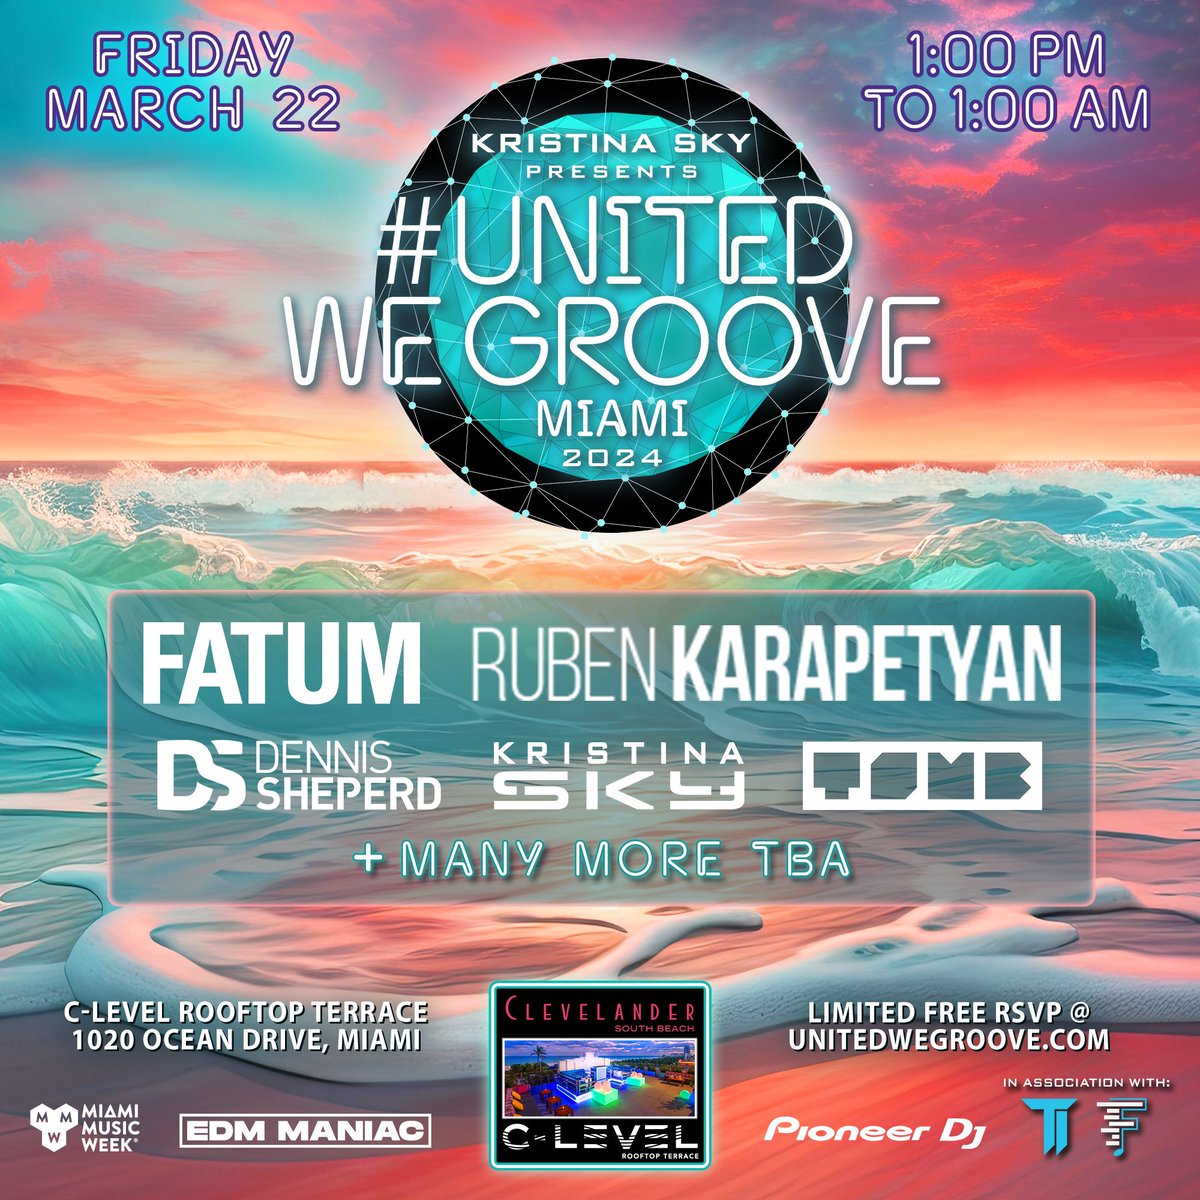 If ur looking for a #MiamiMusicWeek party featuring the best in organic house, progressive, melodic techno & trance, we got u covered! 🫡 Phase 2 lineup dropping soon 👀 In the meantime, get on the FREE GL while u still can: unitedwegroovemiami2024.eventbrite.com #miami #mmw #rooftopparty 🌴